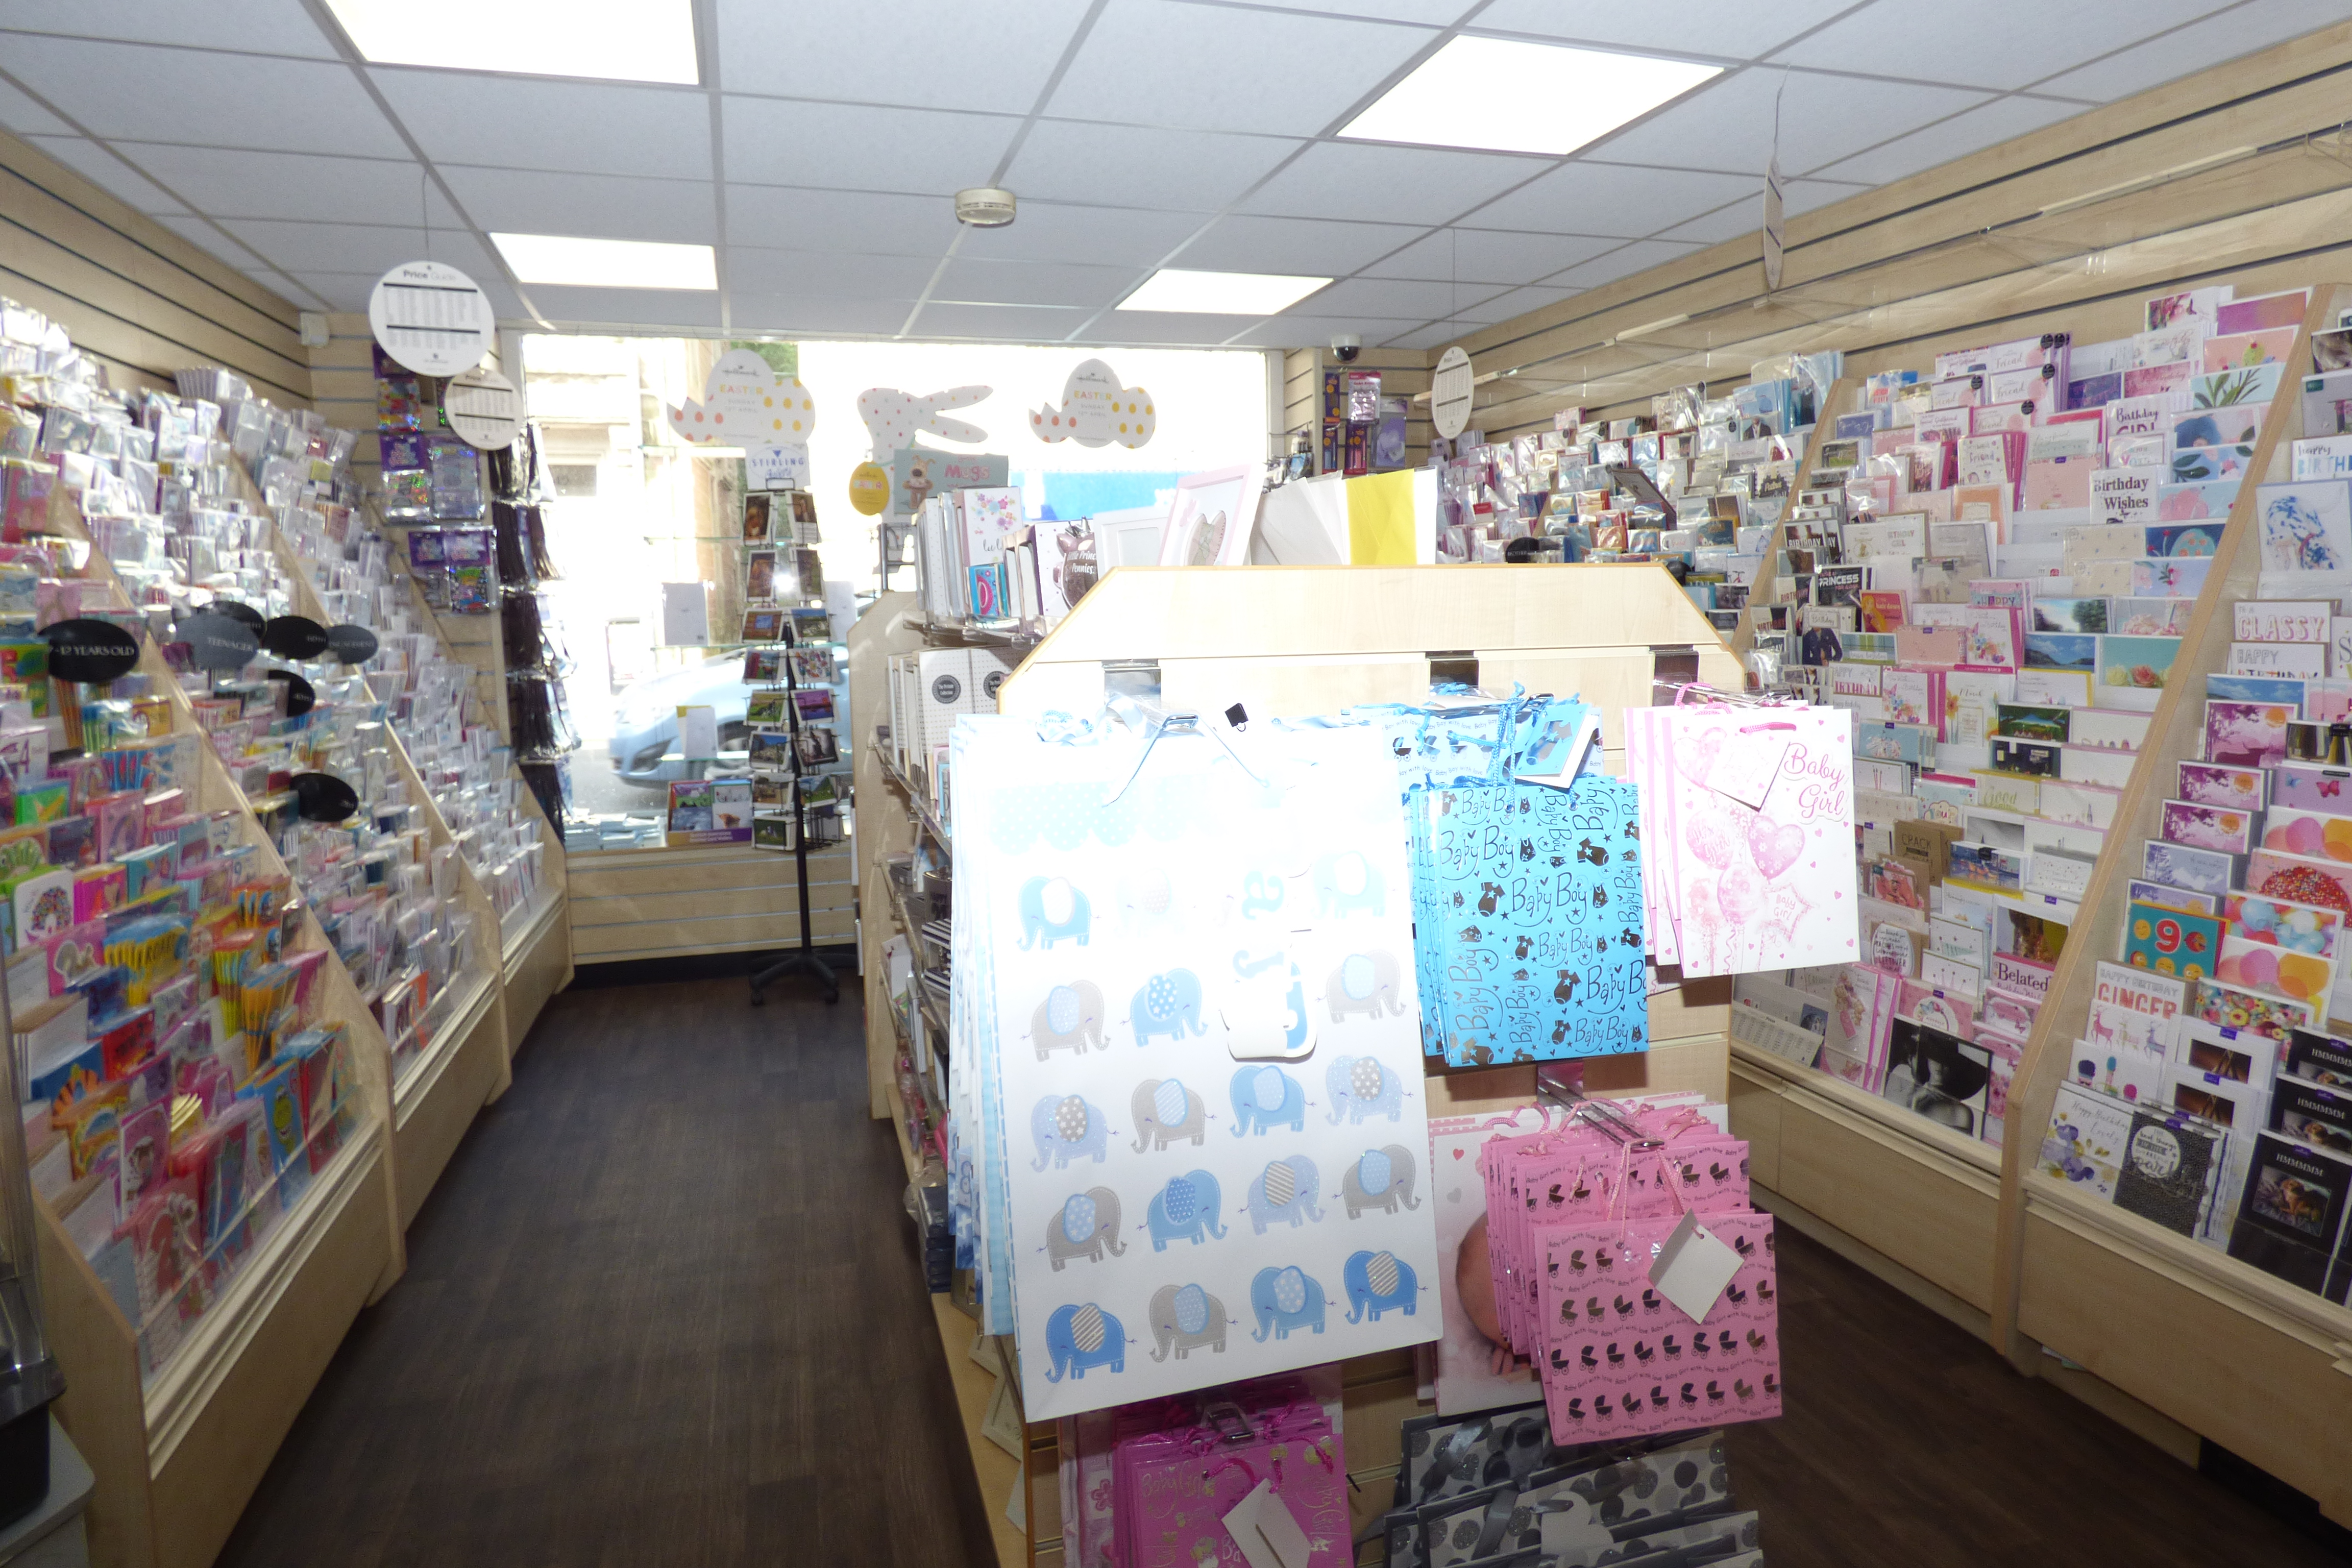 Photograph of Greeting cards and gifts